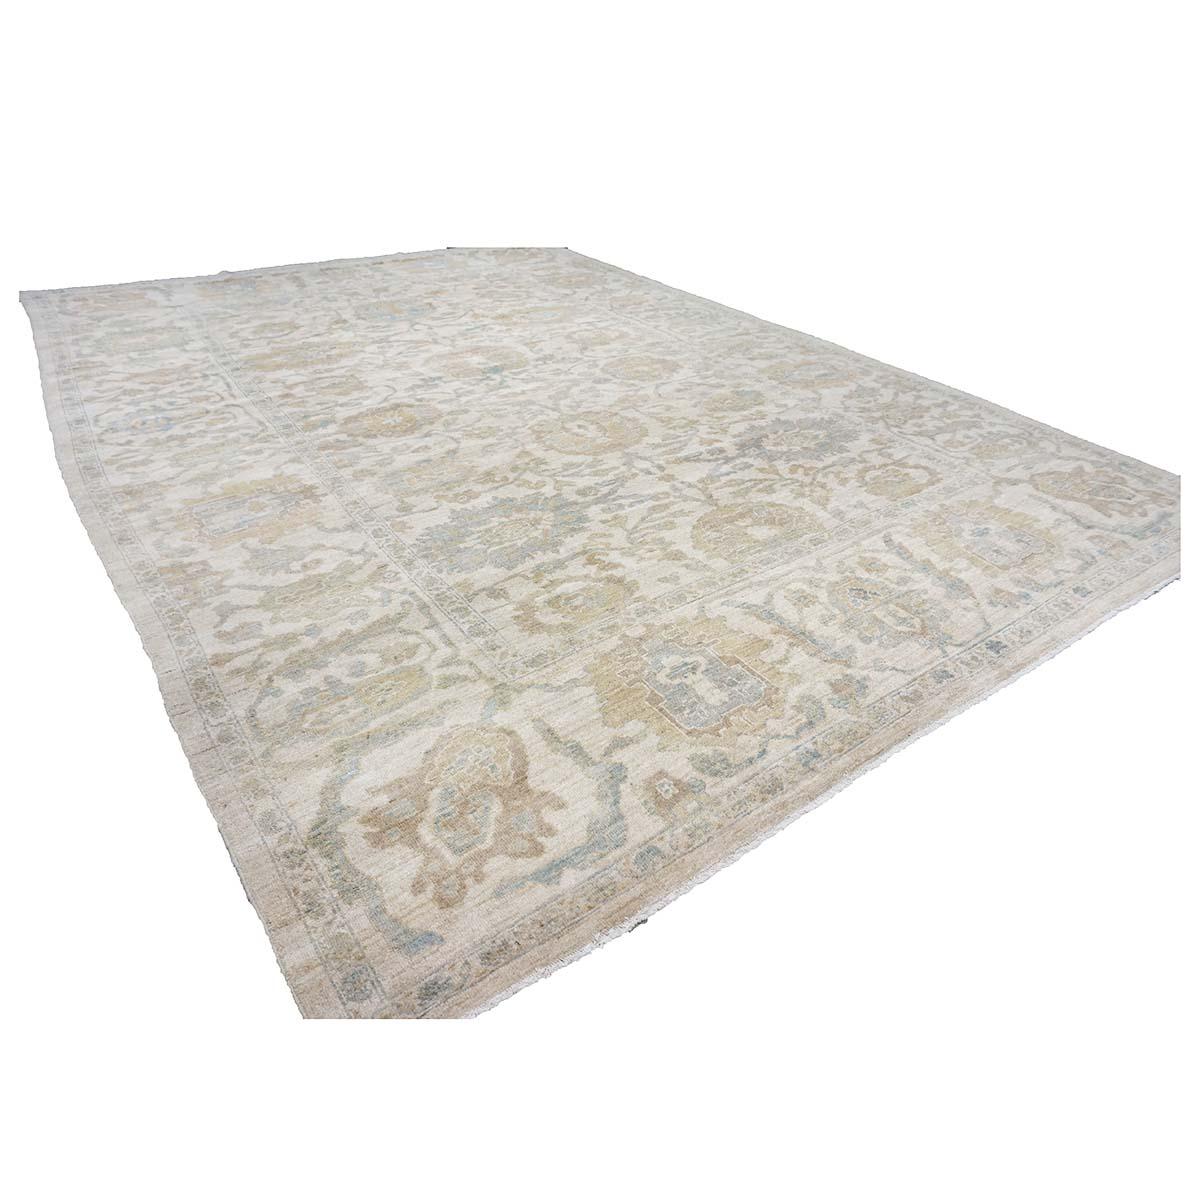 21st Century Sultanabad Master 10x14 Ivory Handmade Area Rug In Excellent Condition For Sale In Houston, TX